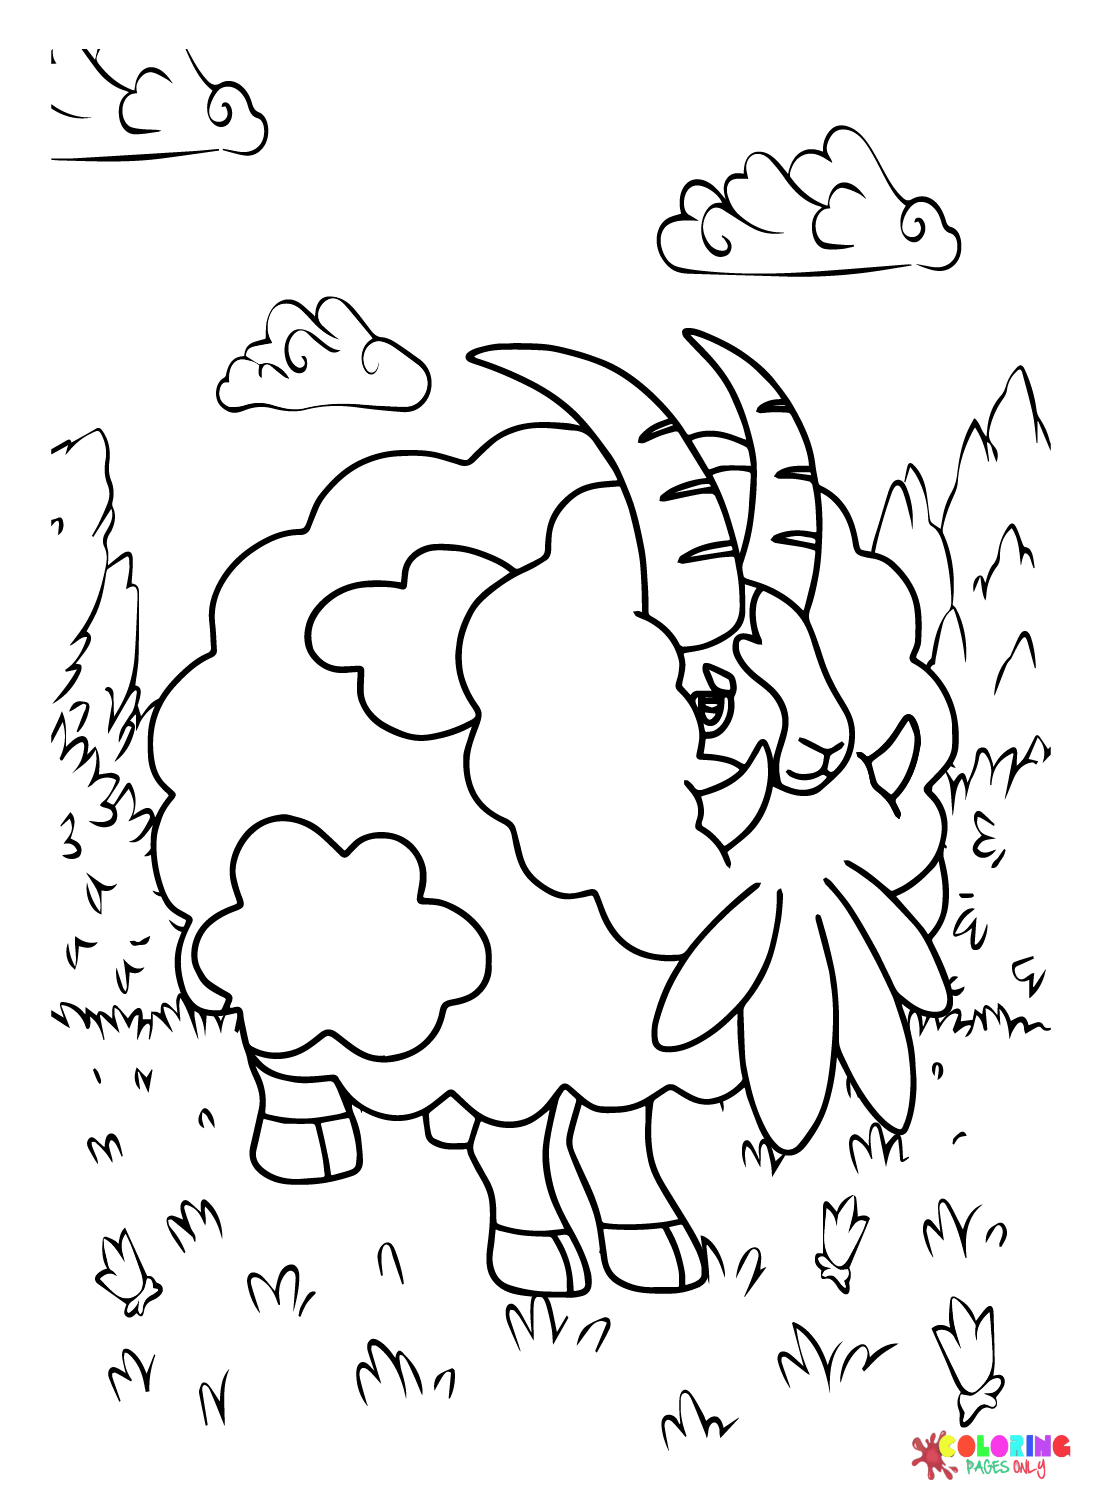 Dubwool and Wooloo Coloring Page - Free Printable Coloring Pages